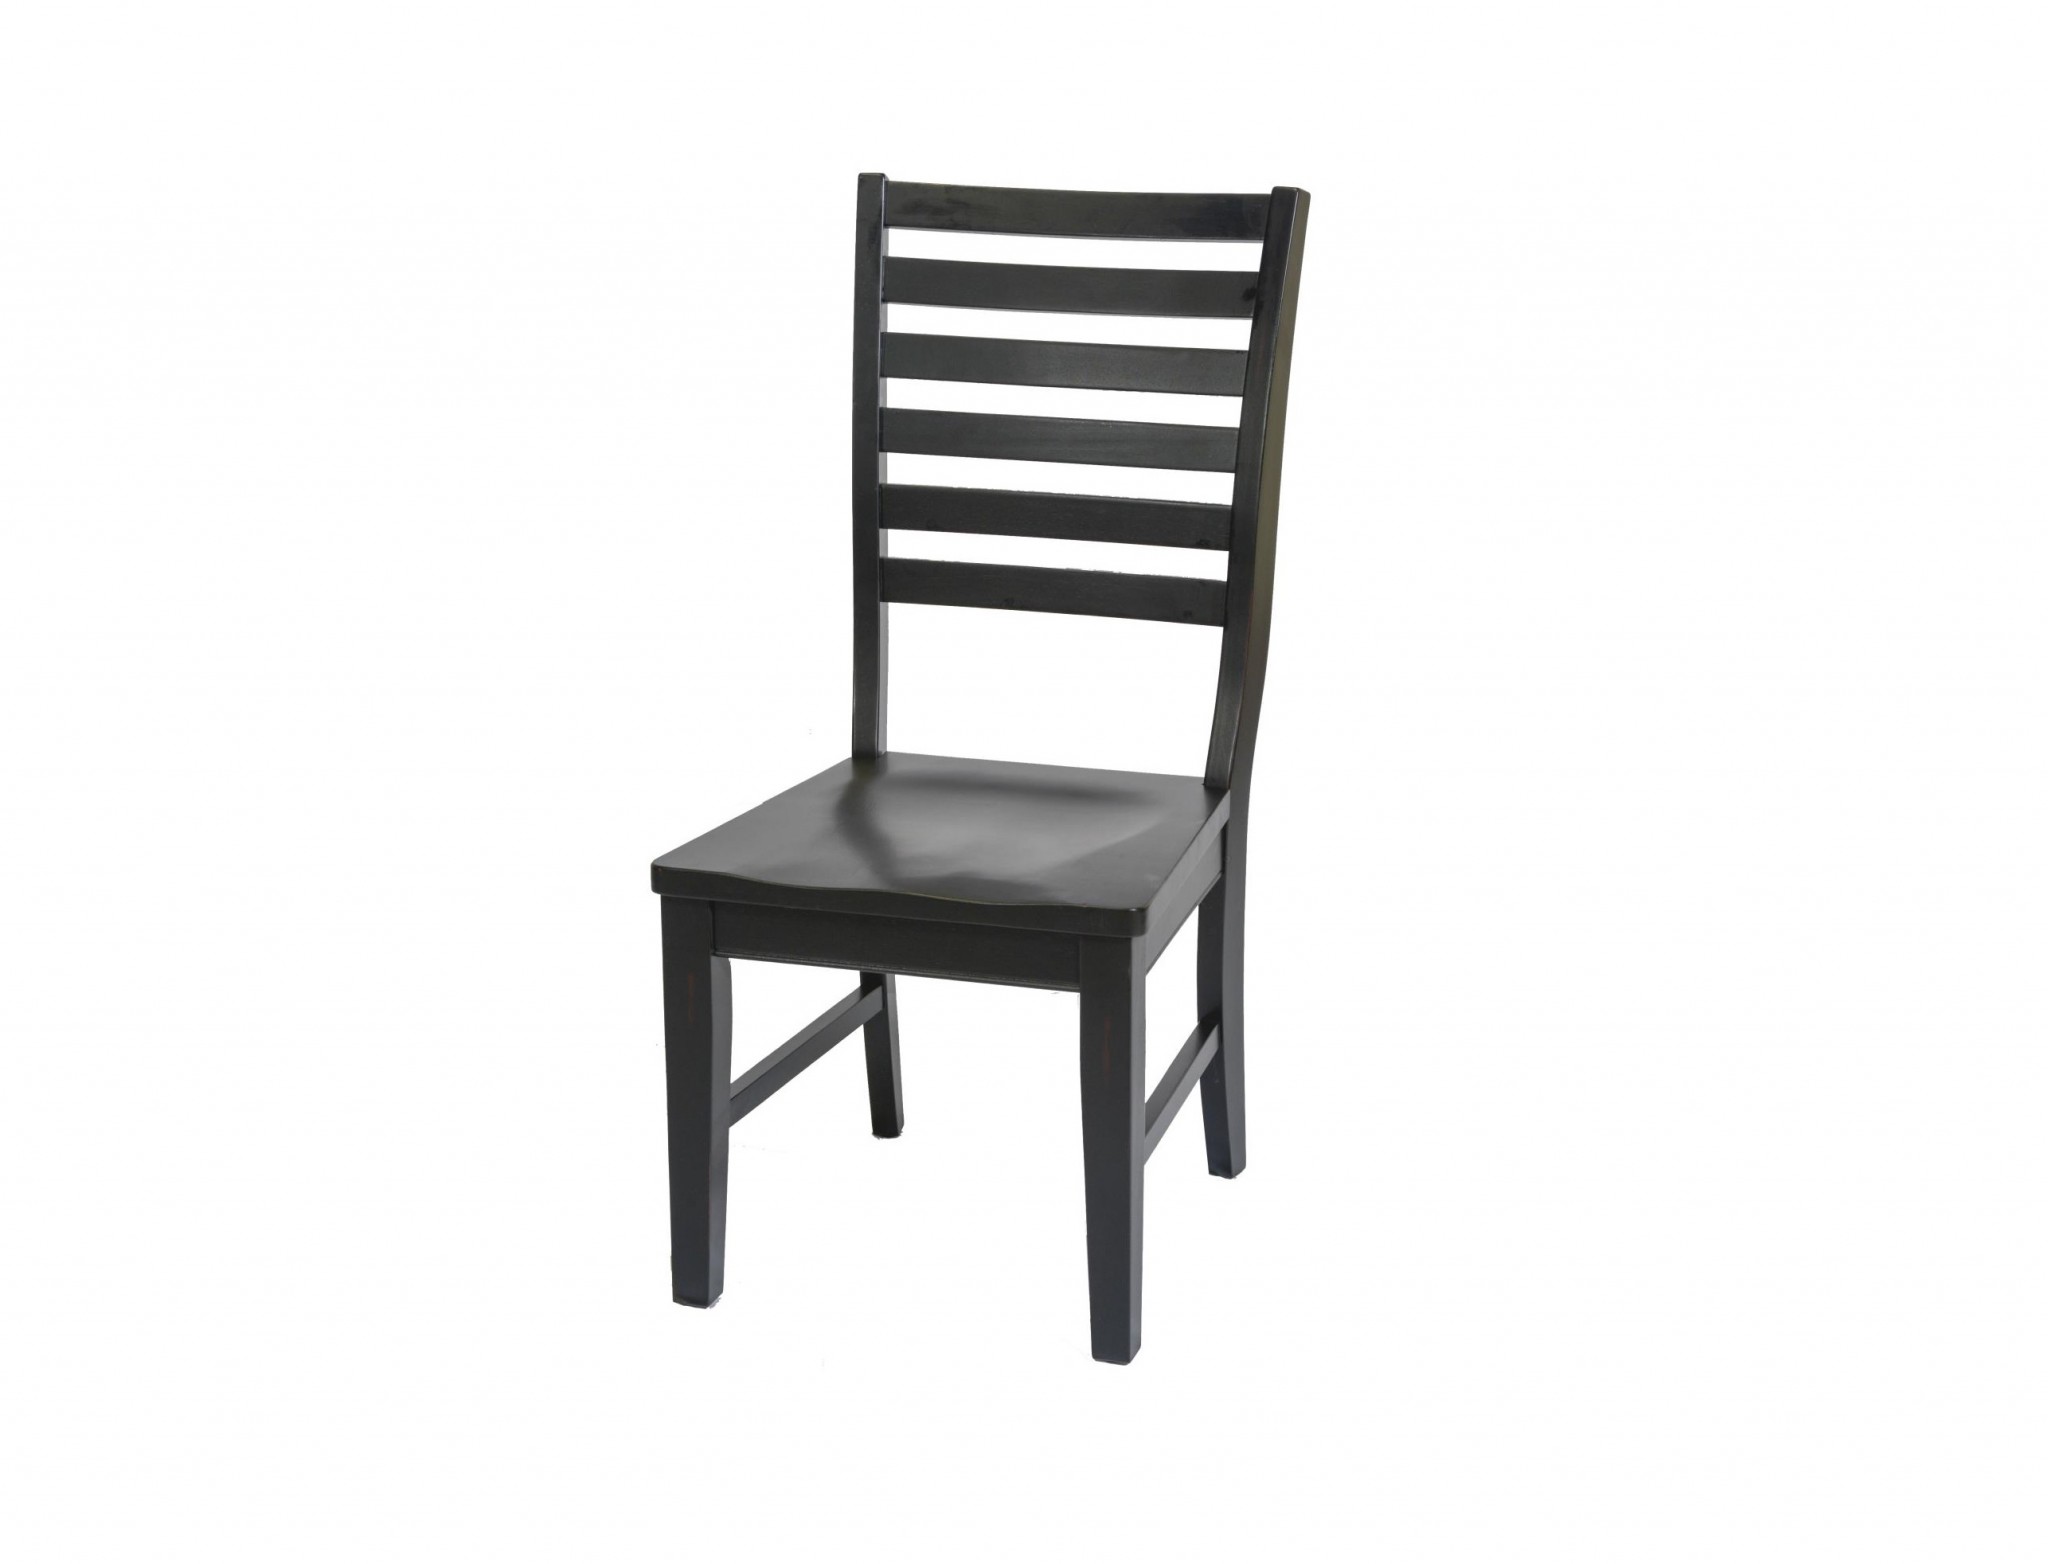 Classic Ladder Back Black Hardwood Dining or Side Chair